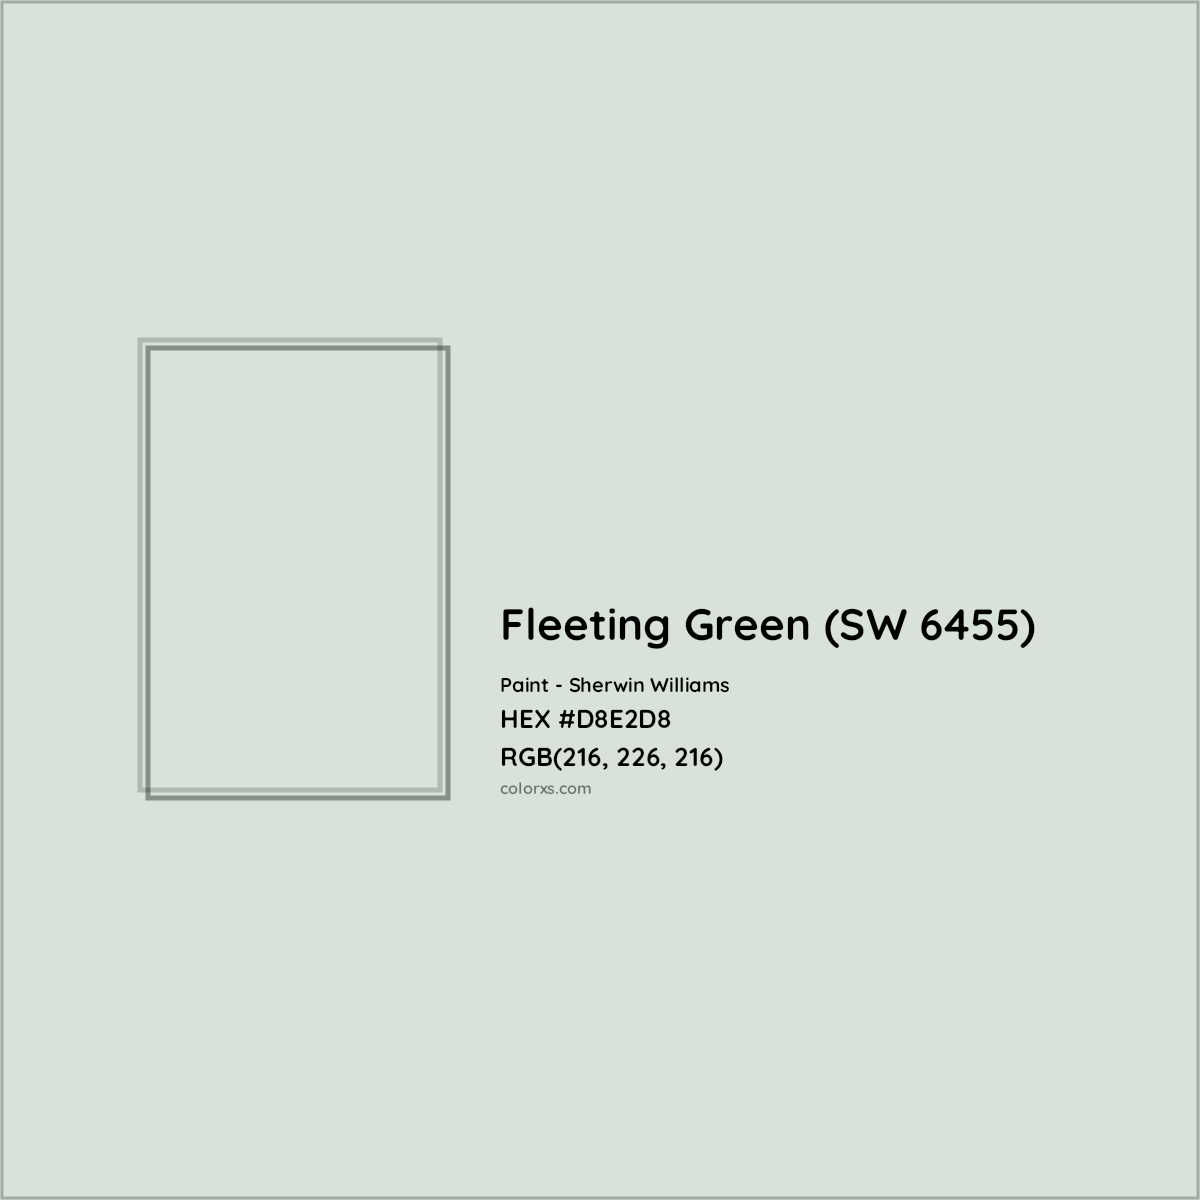 HEX #D8E2D8 Fleeting Green (SW 6455) Paint Sherwin Williams - Color Code